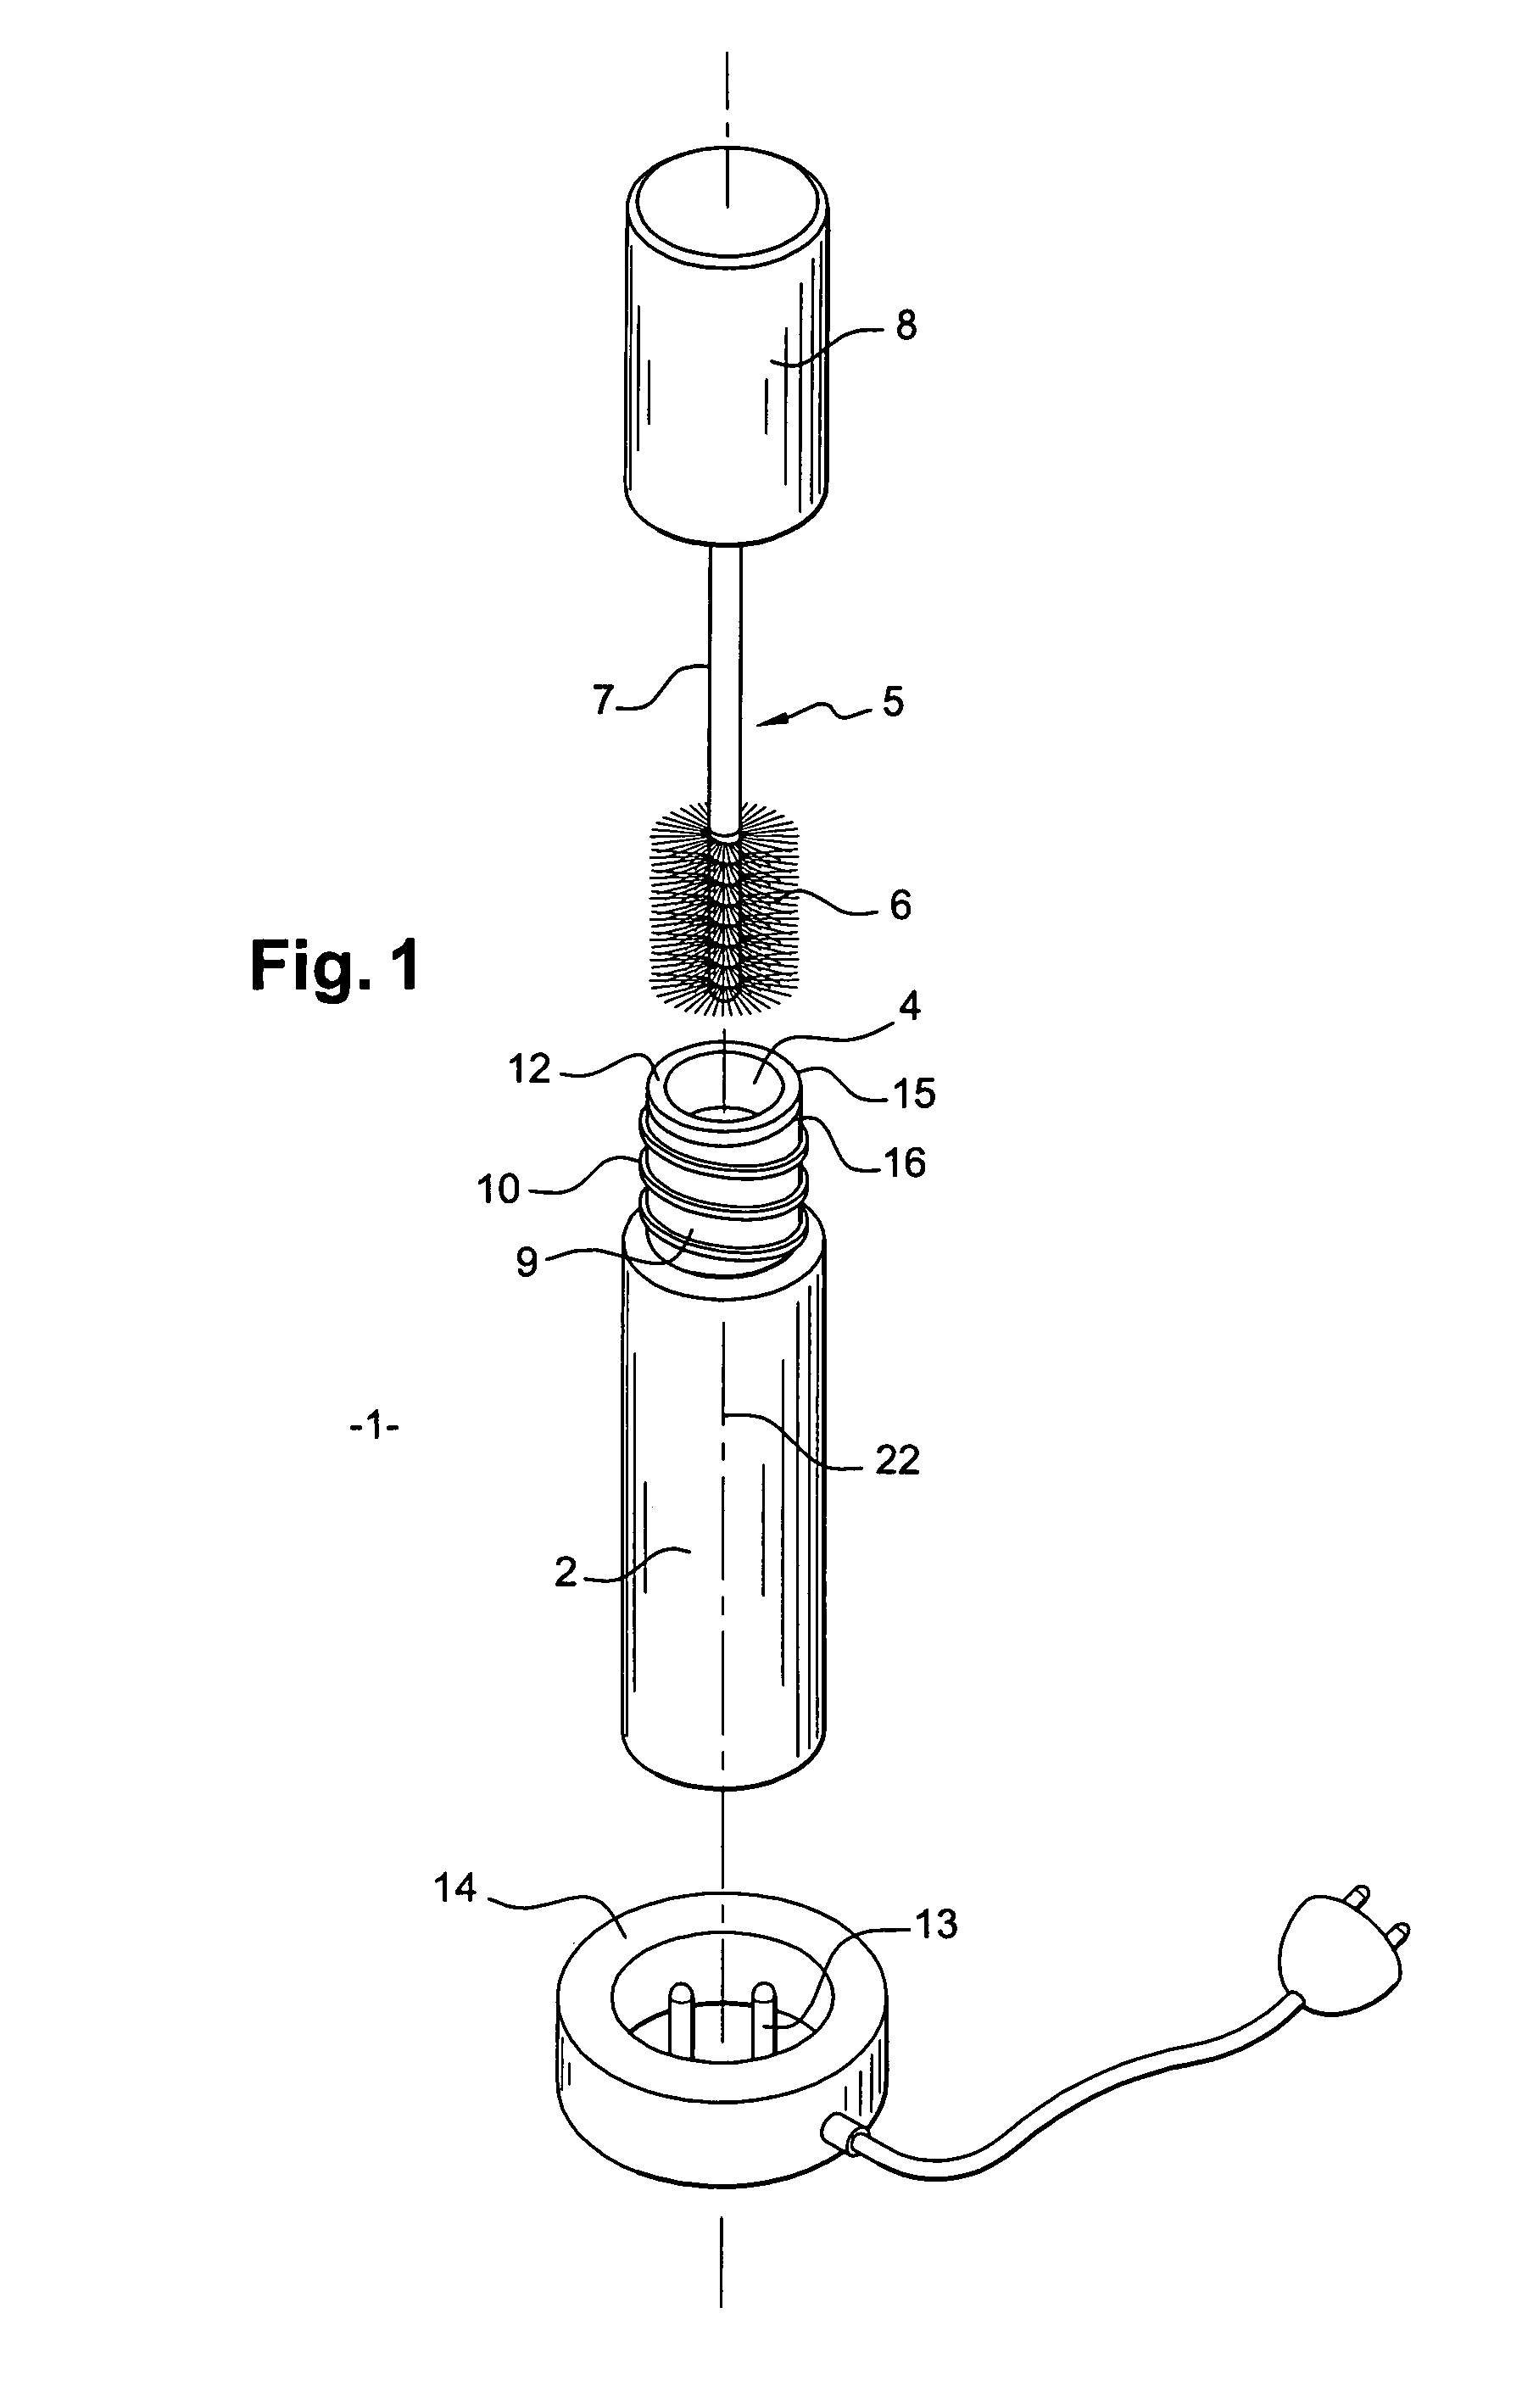 Packaging and applicator device for a cosmetic product and/or a beauty care product incorporating a means of heating